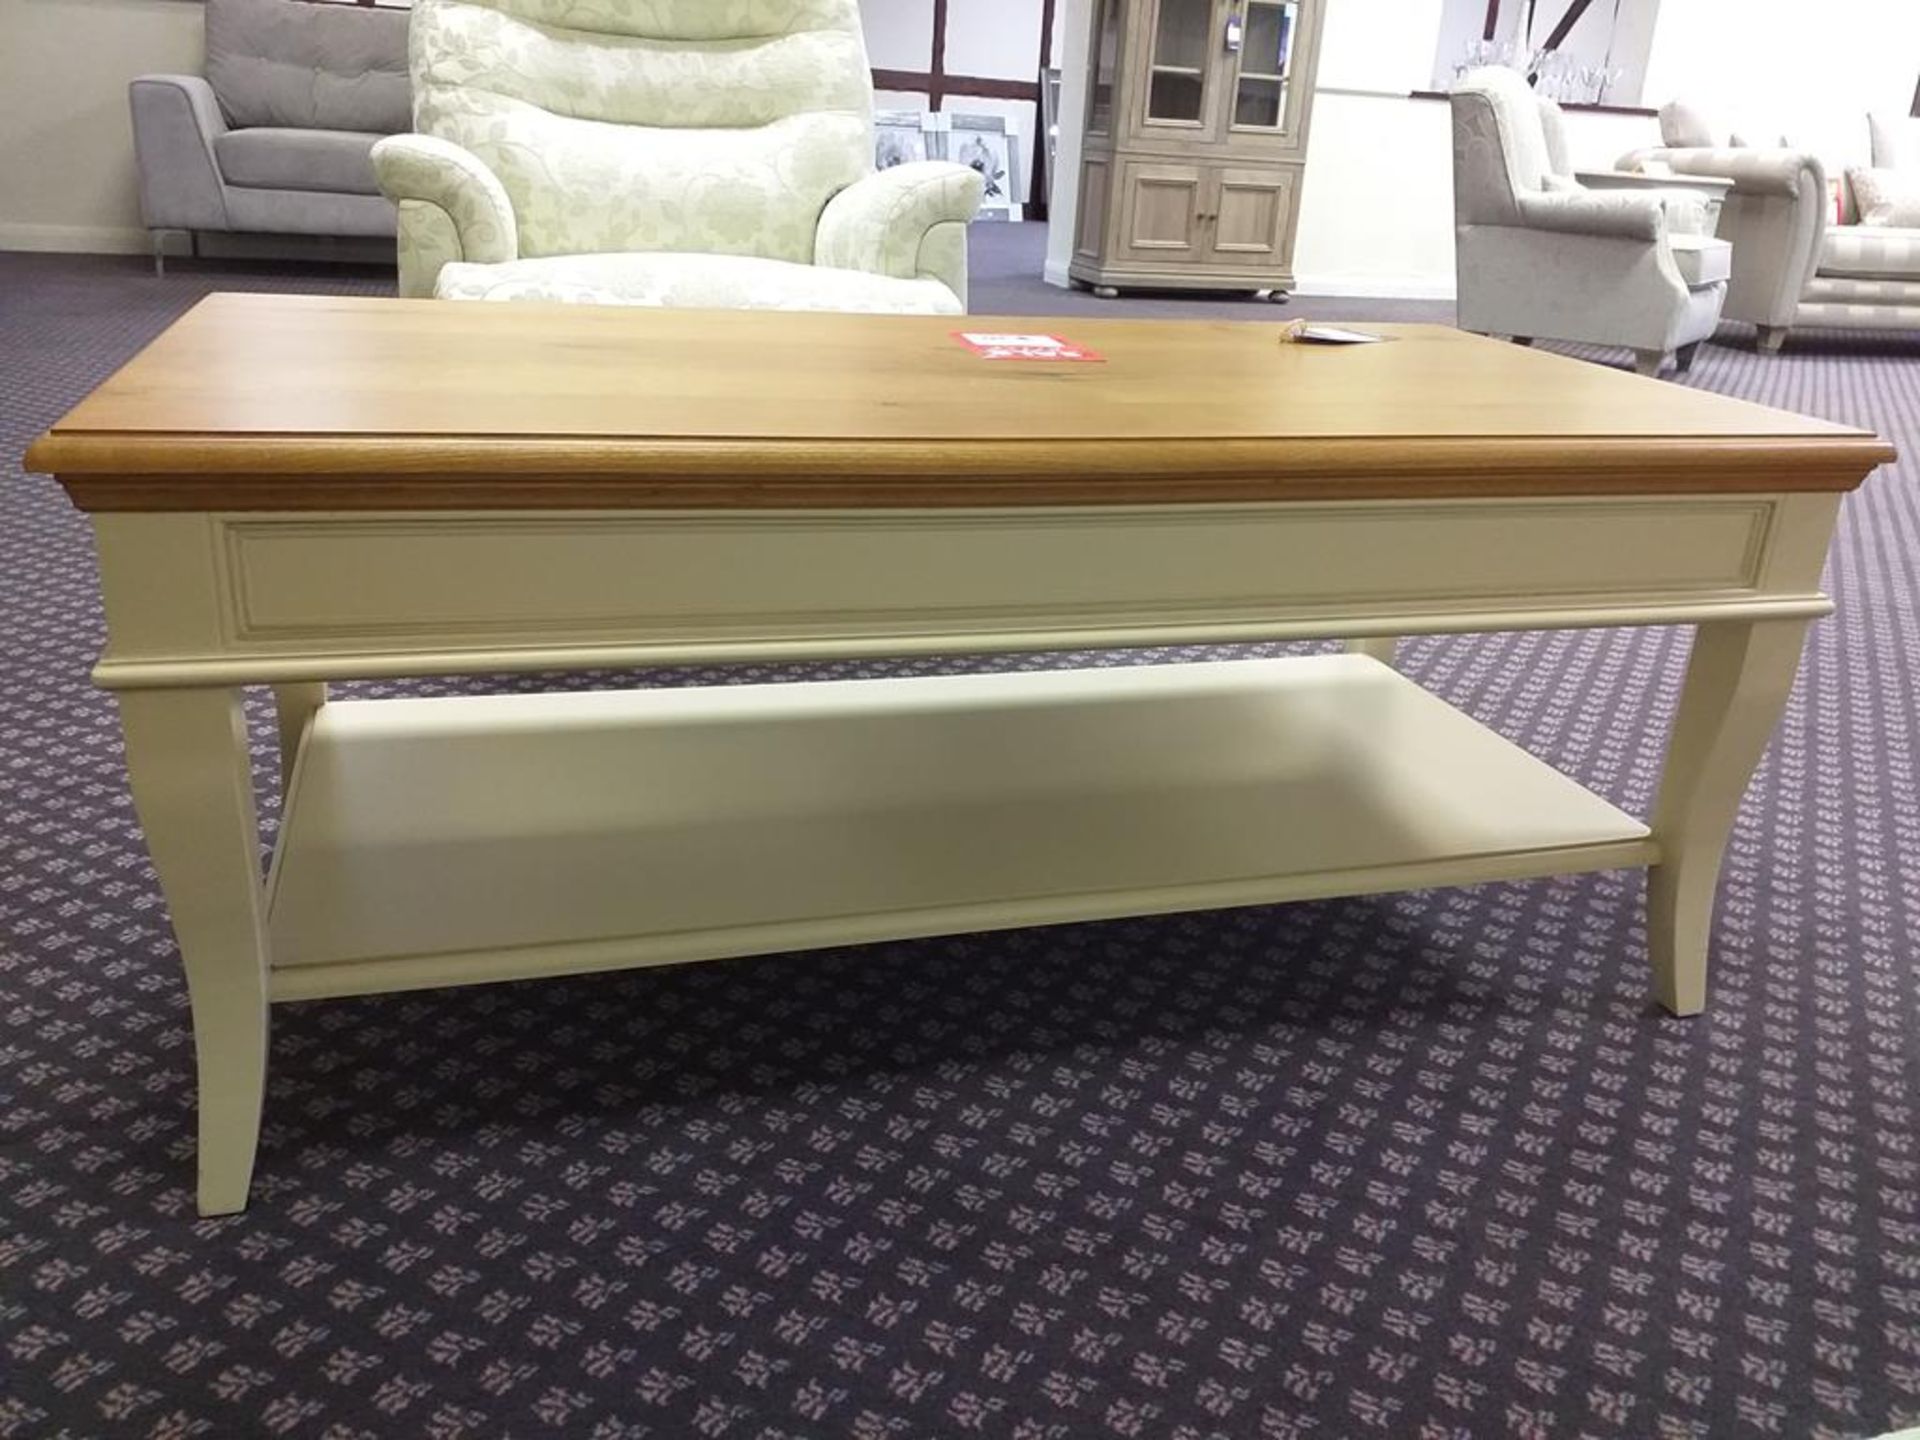 Country house oak top coffee table - Image 2 of 5